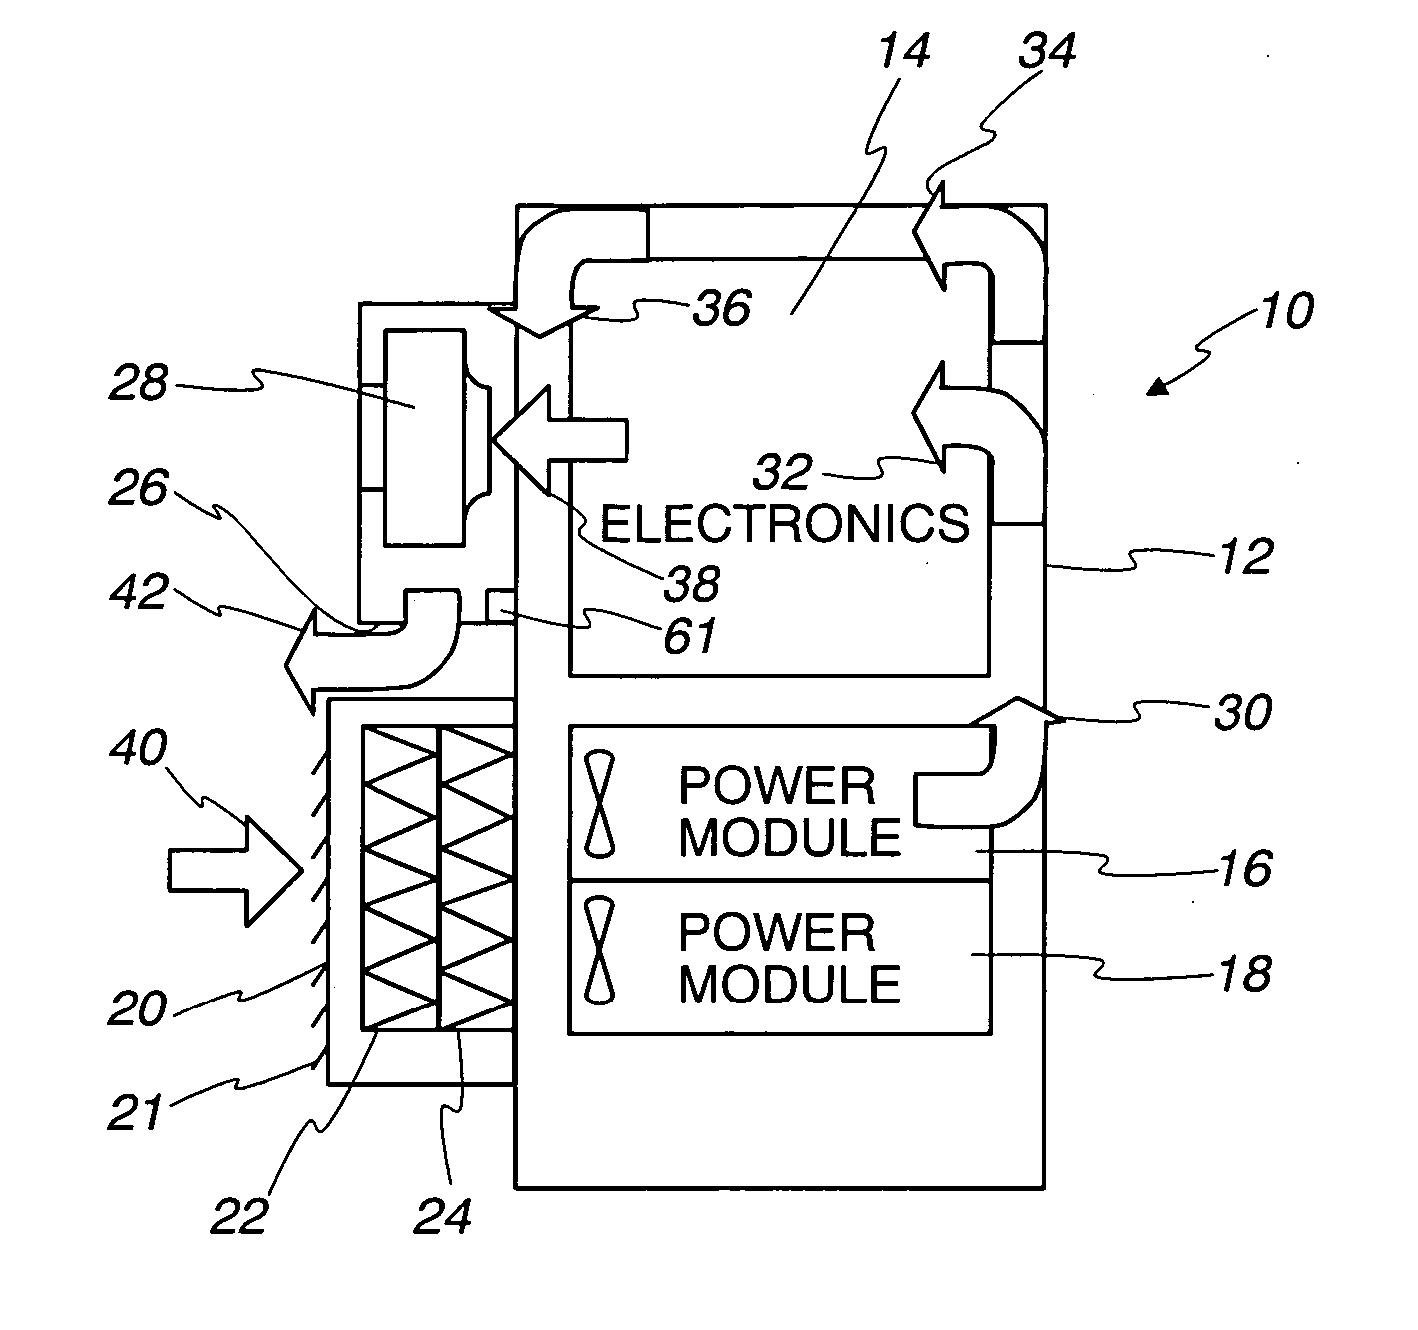 Filter system for an electronic equipment enclosure